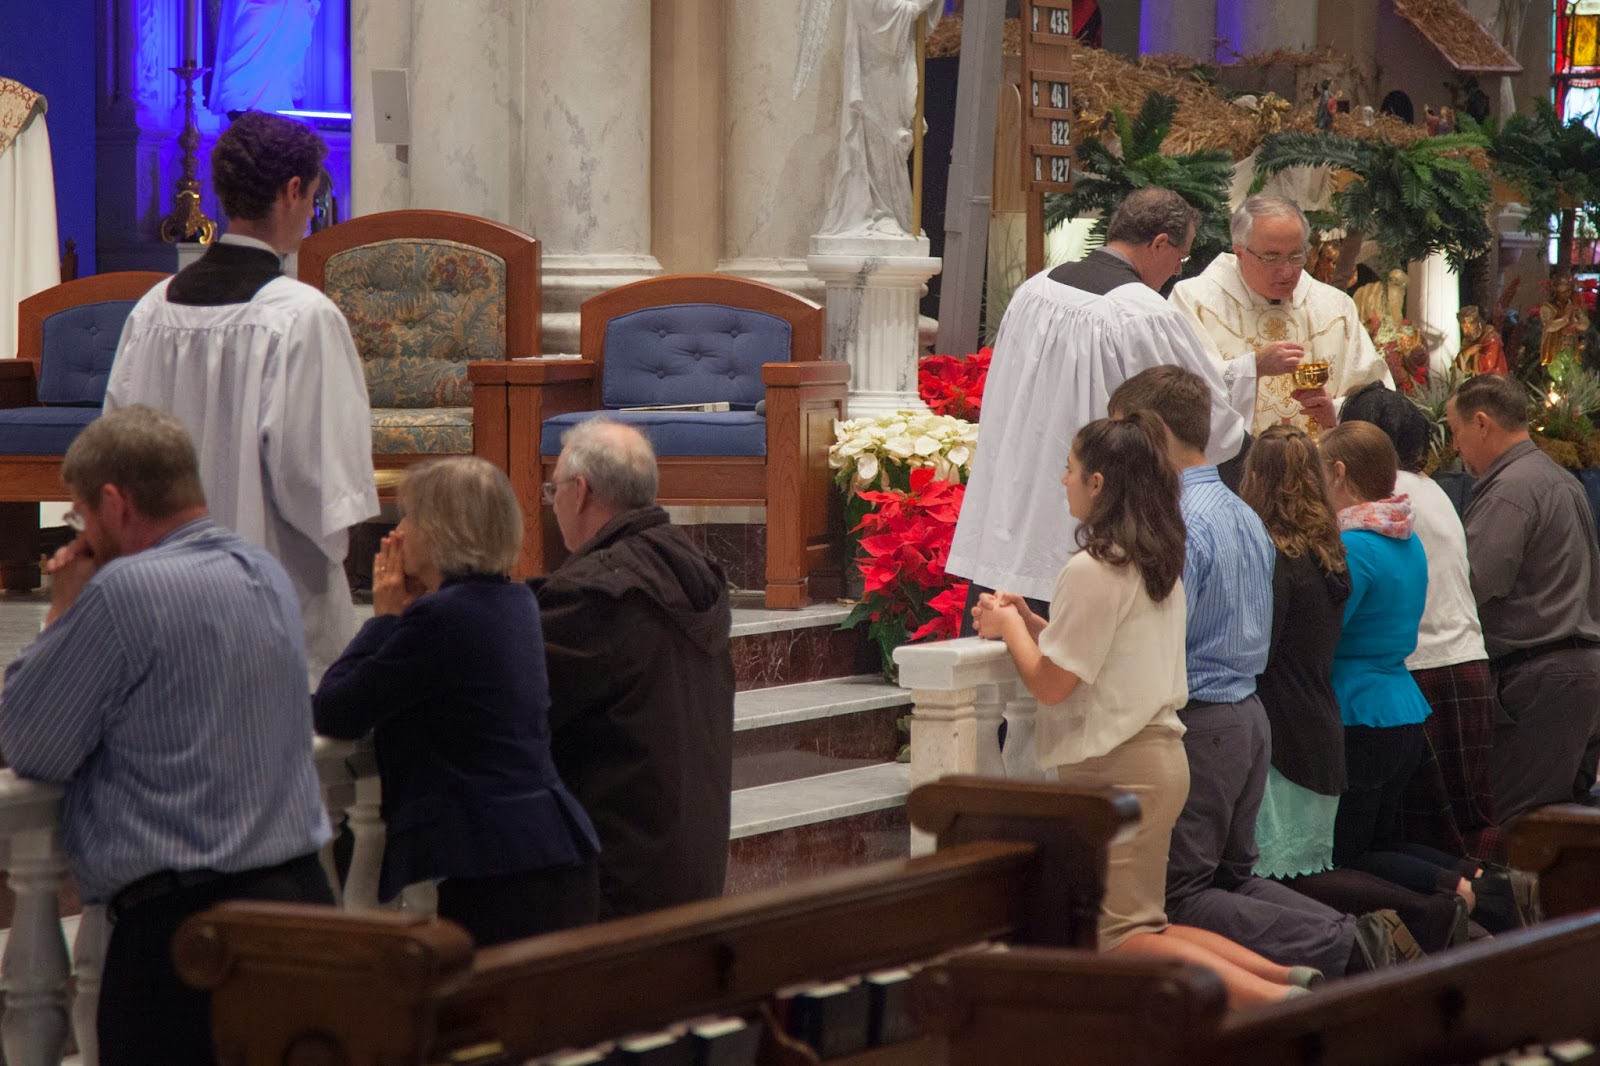 The faithful kneeling at the altar rail during the distribution of Holy Communion.